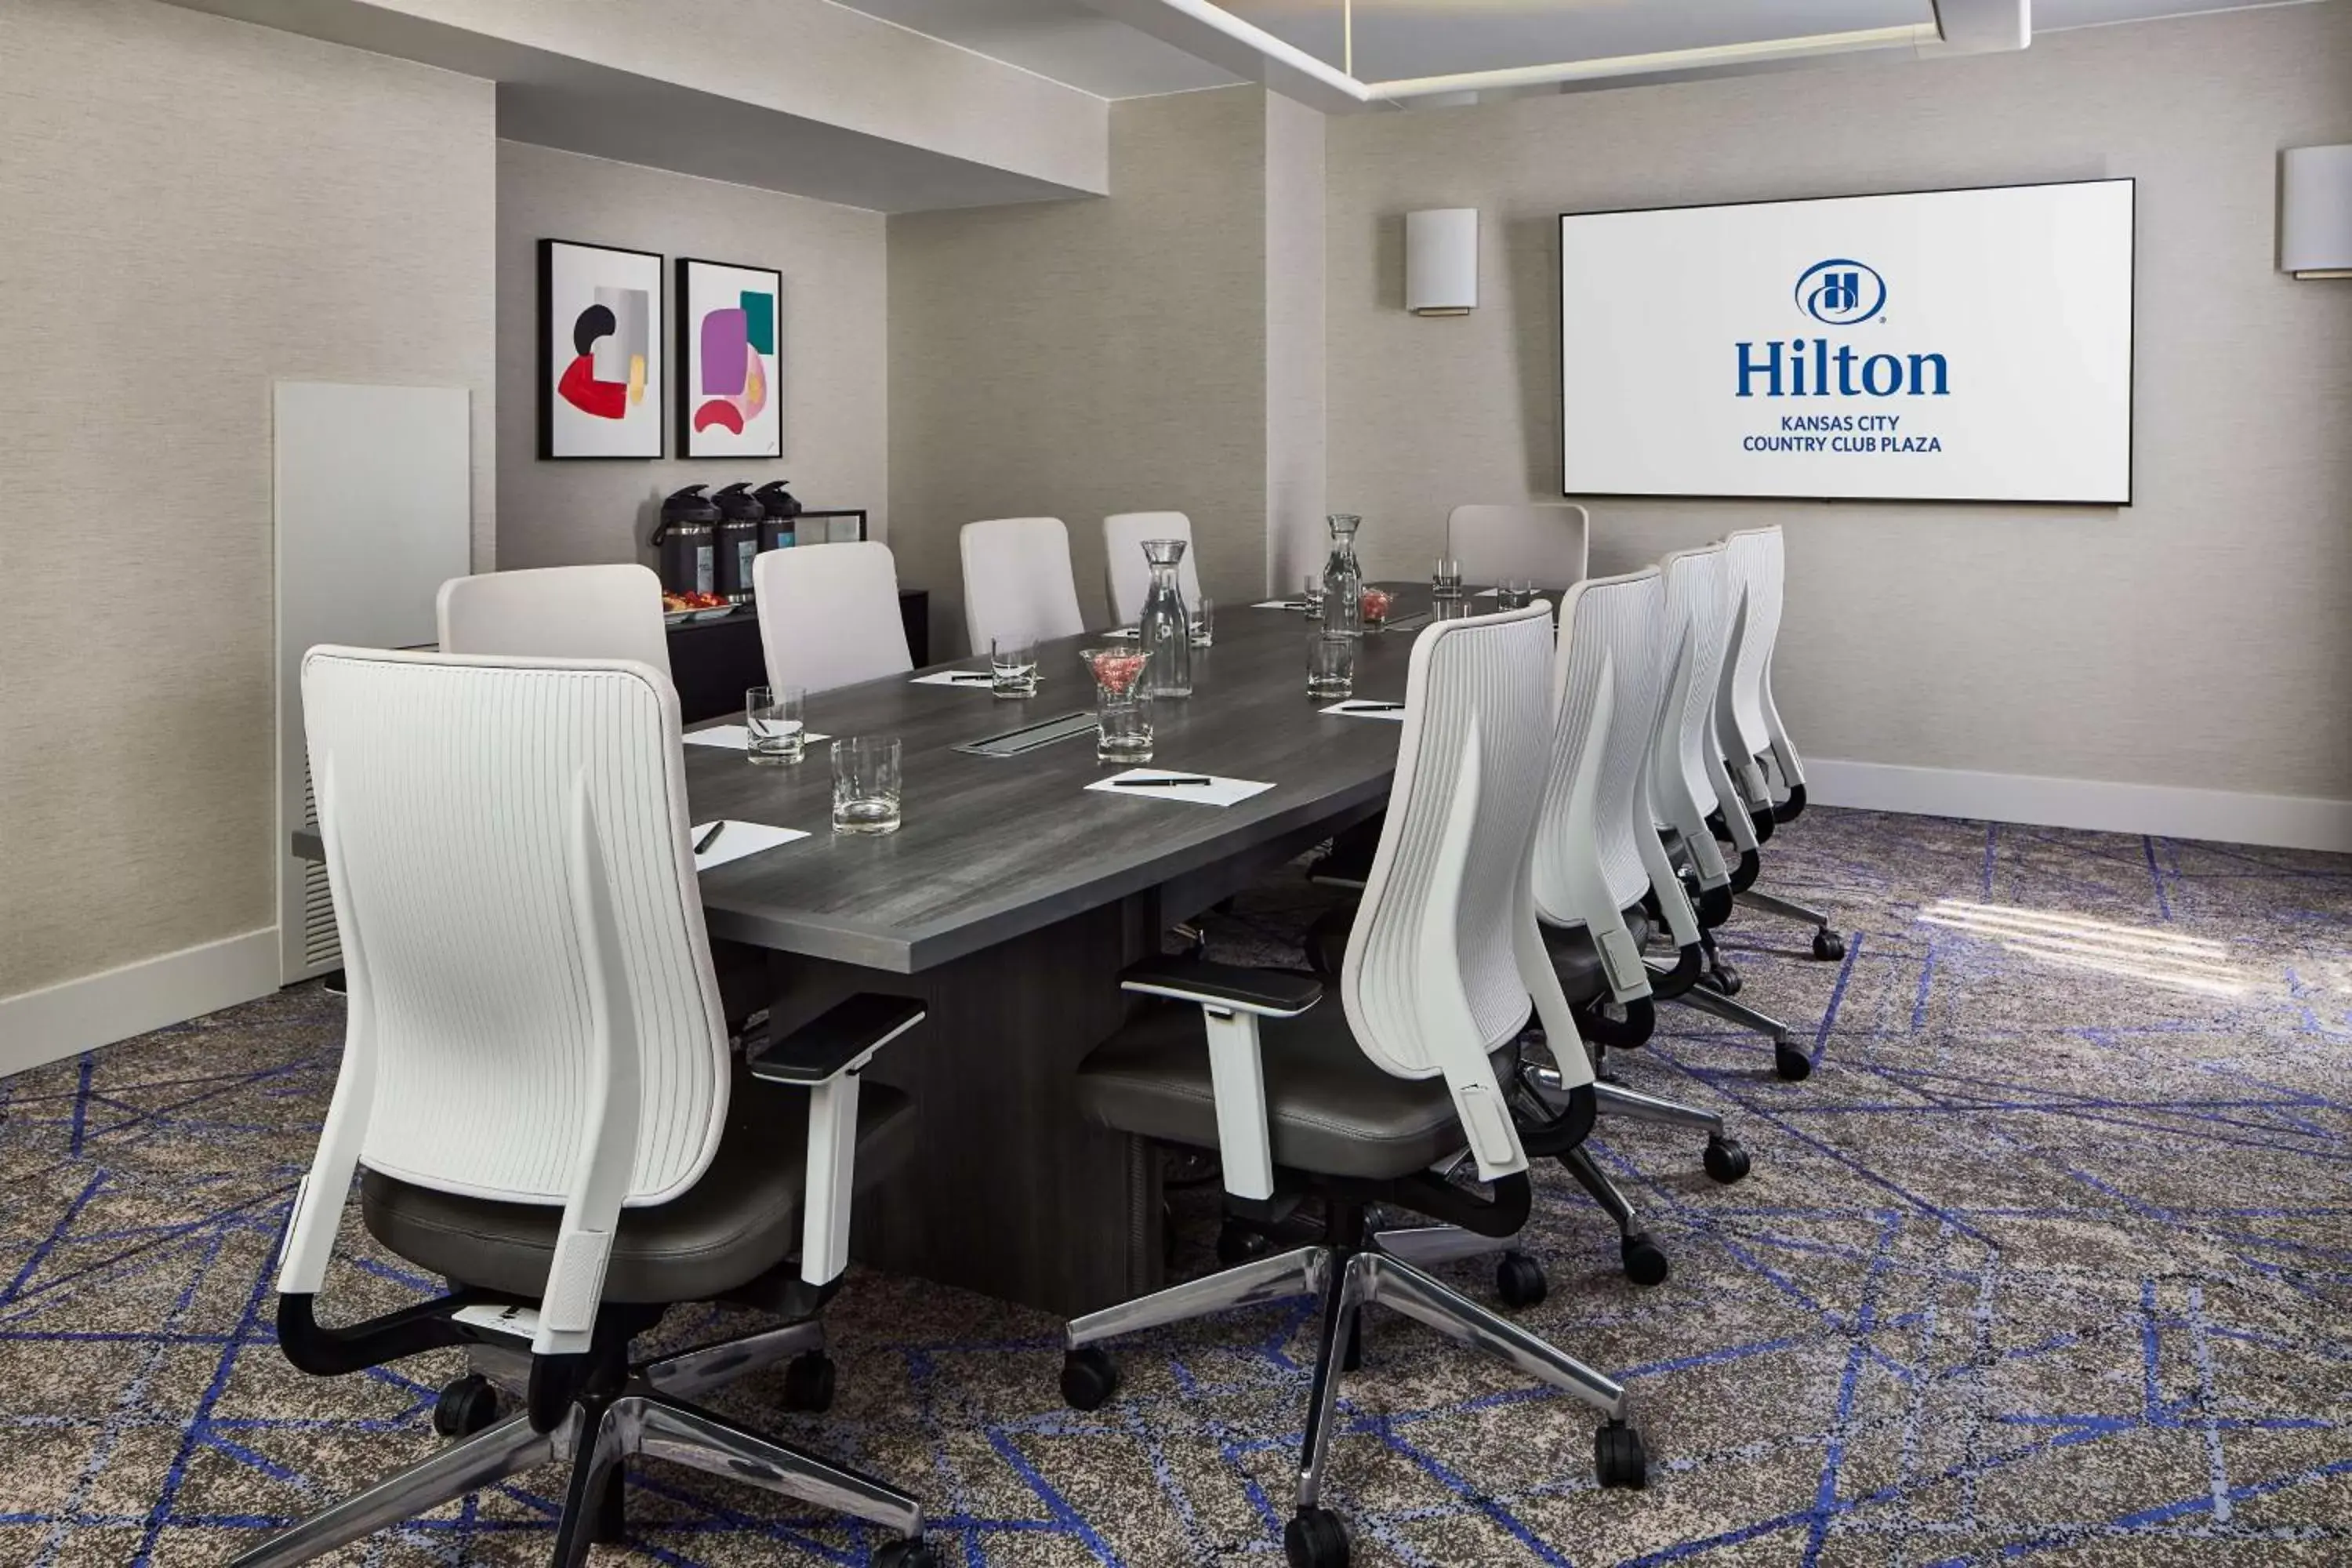 Meeting/conference room in Hilton Kansas City Country Club Plaza